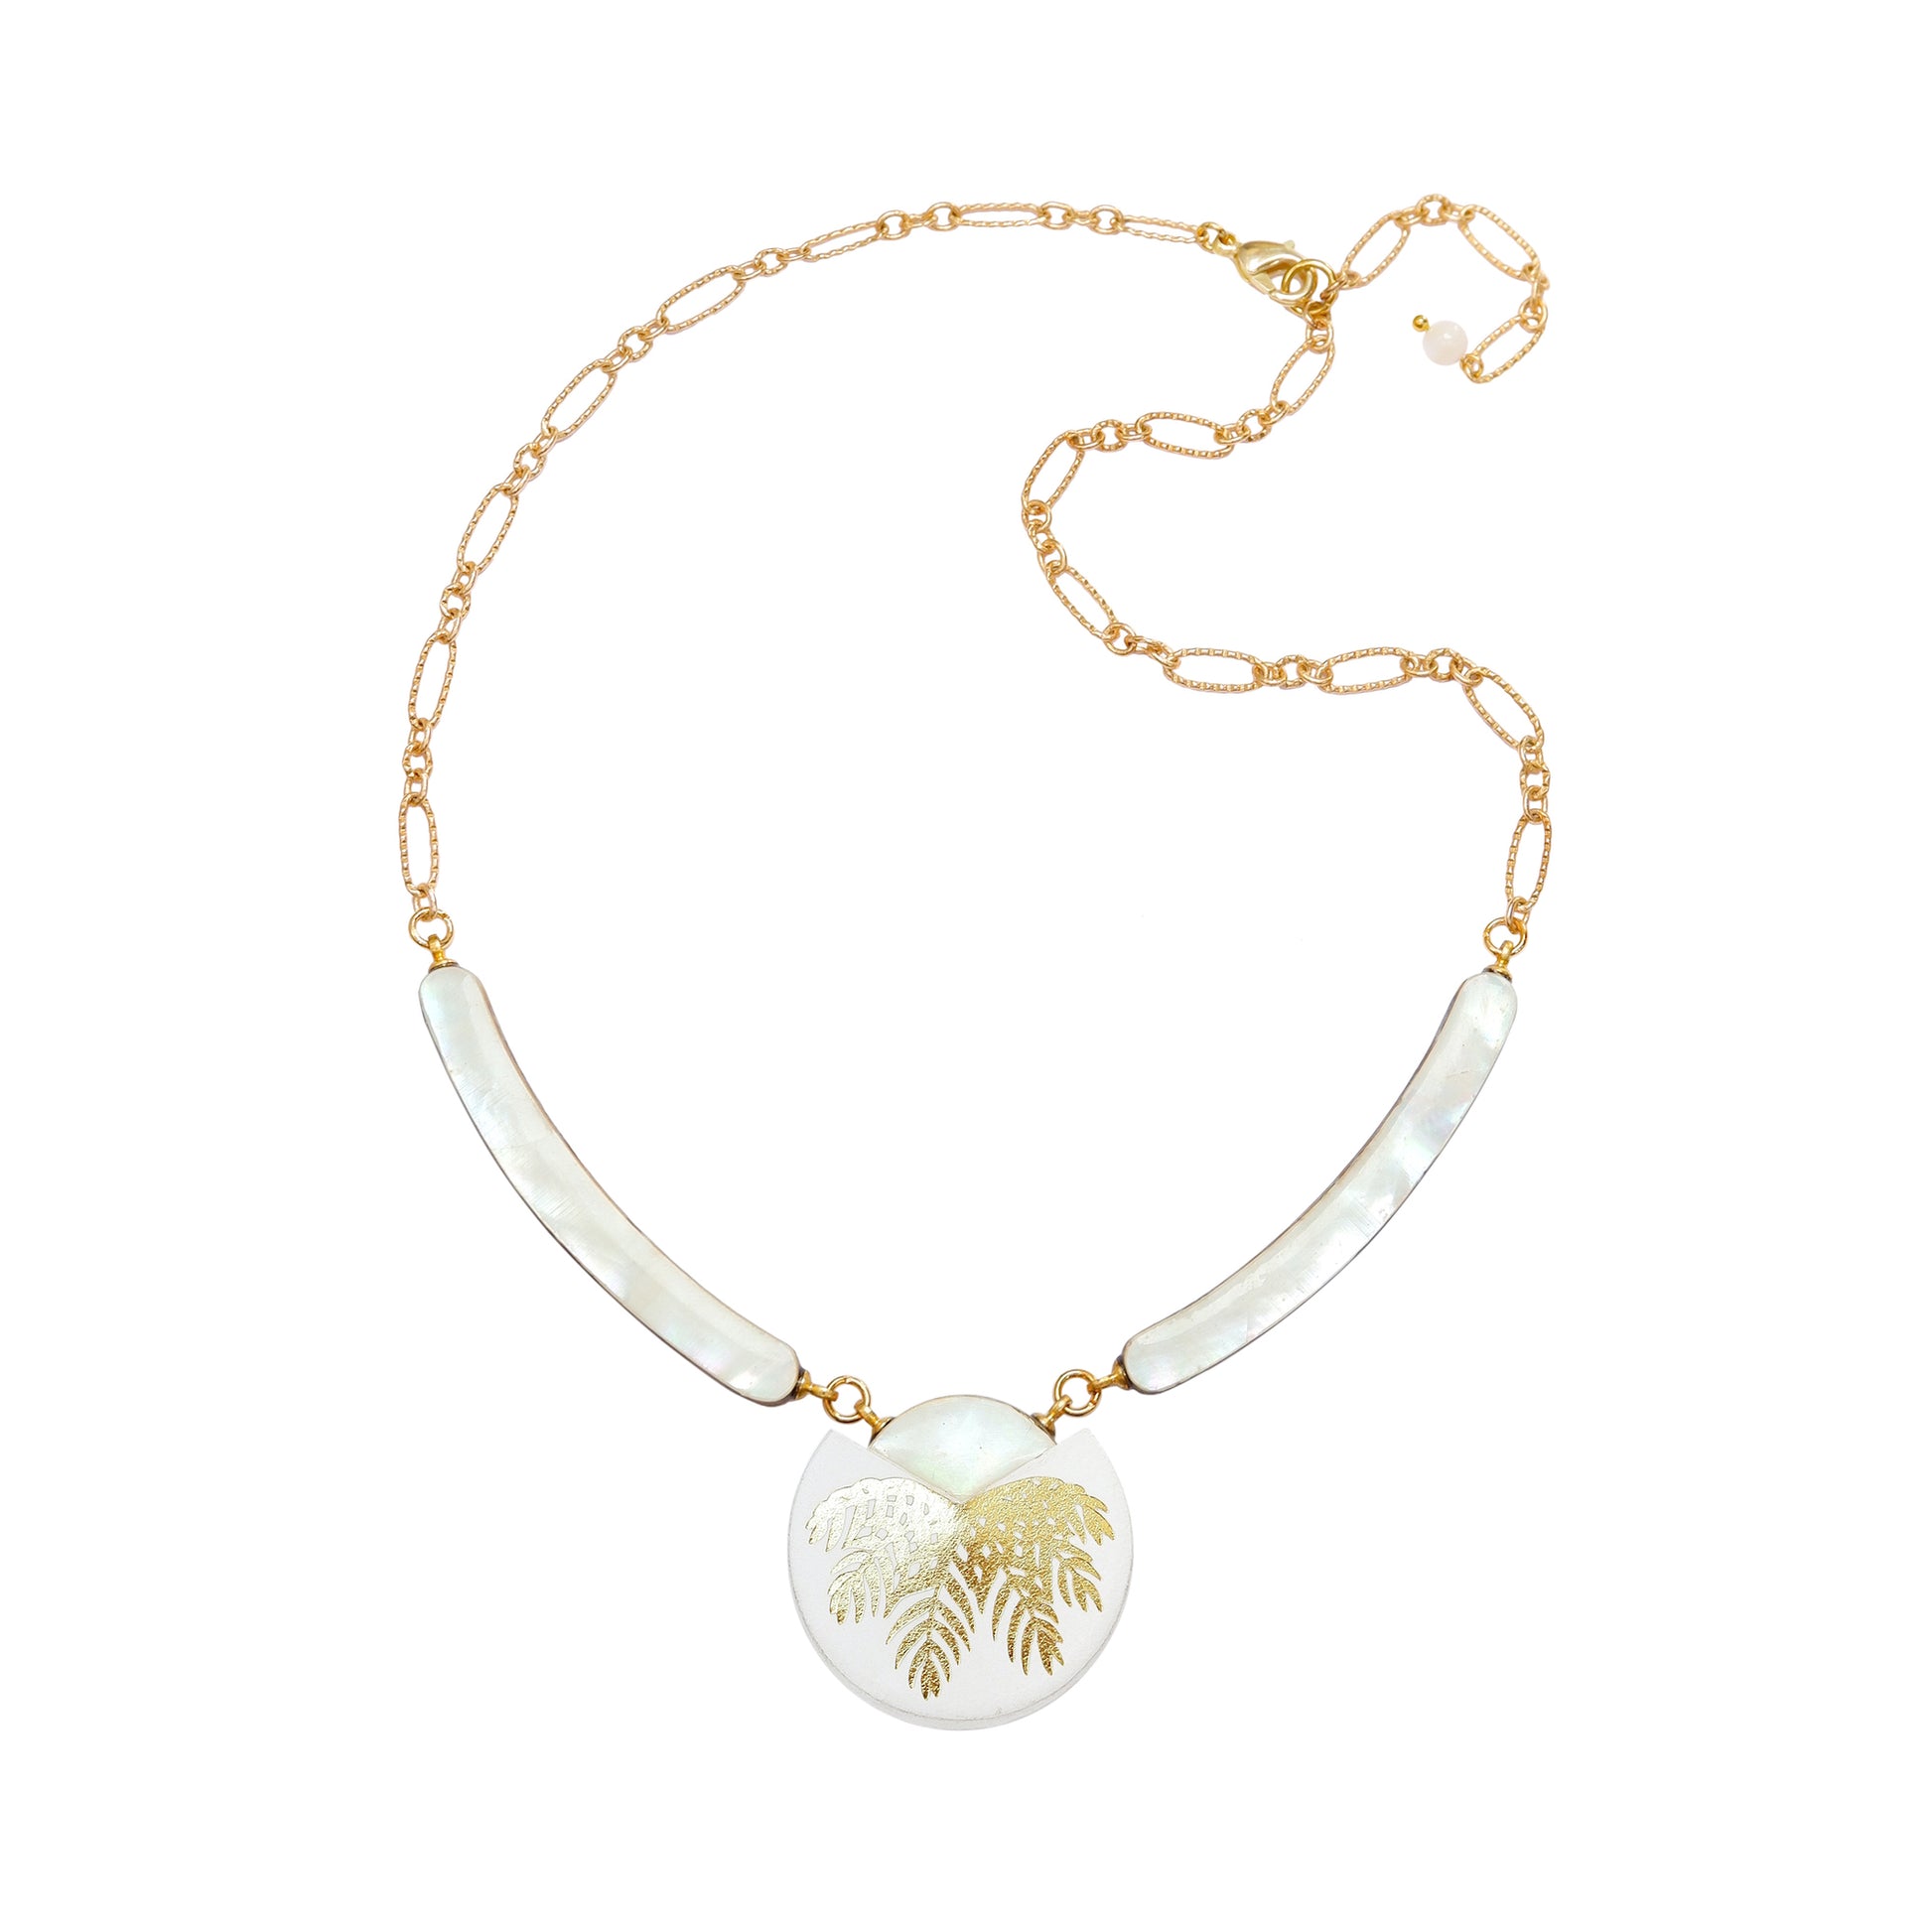 necklace with curved mother of pearl bars , white leather medallion with a gold palm print